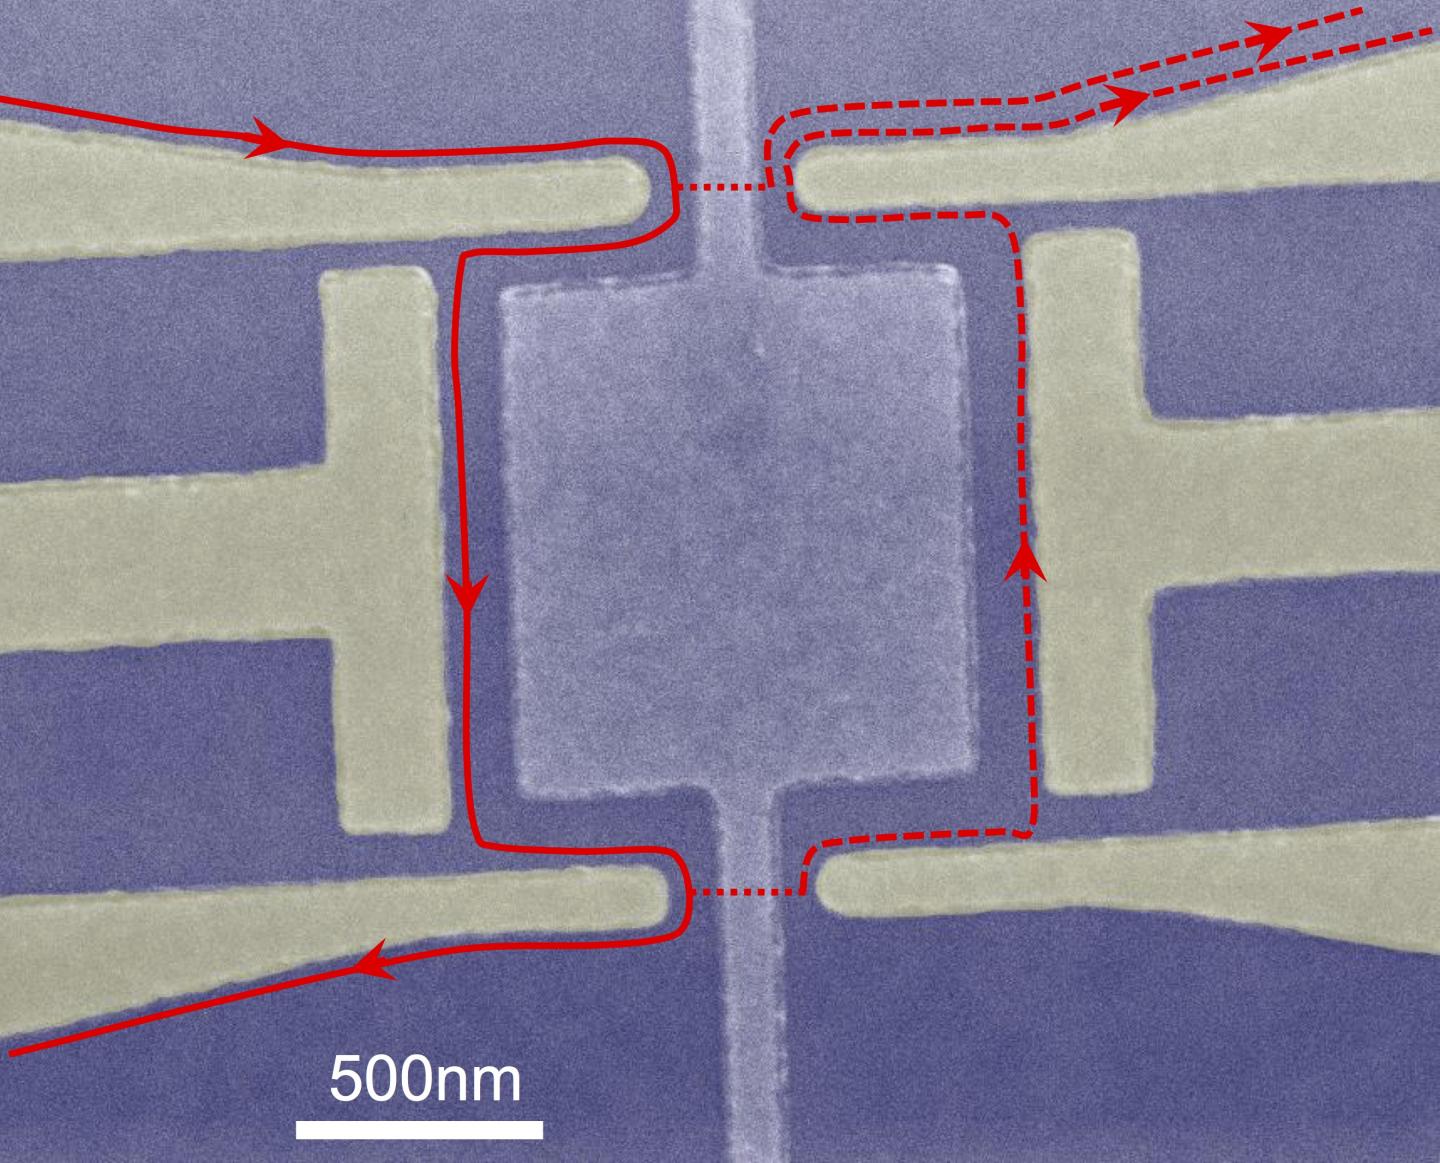 Device Allows Researchers to Probe Interference of Quasiparticles